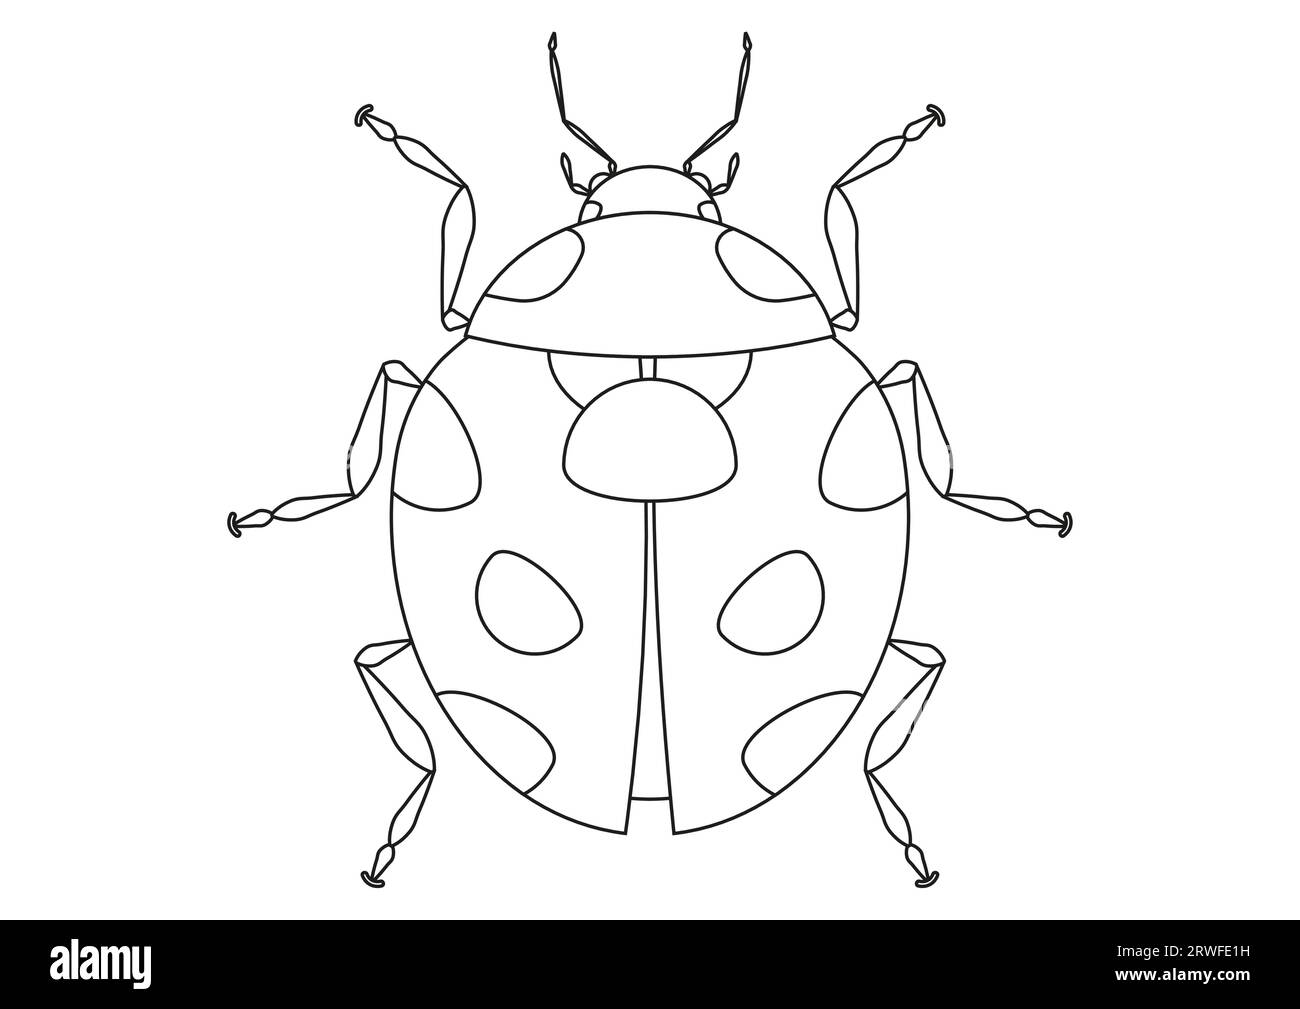 Coloring Page of a Ladybug Cartoon Character Vector Stock Vector